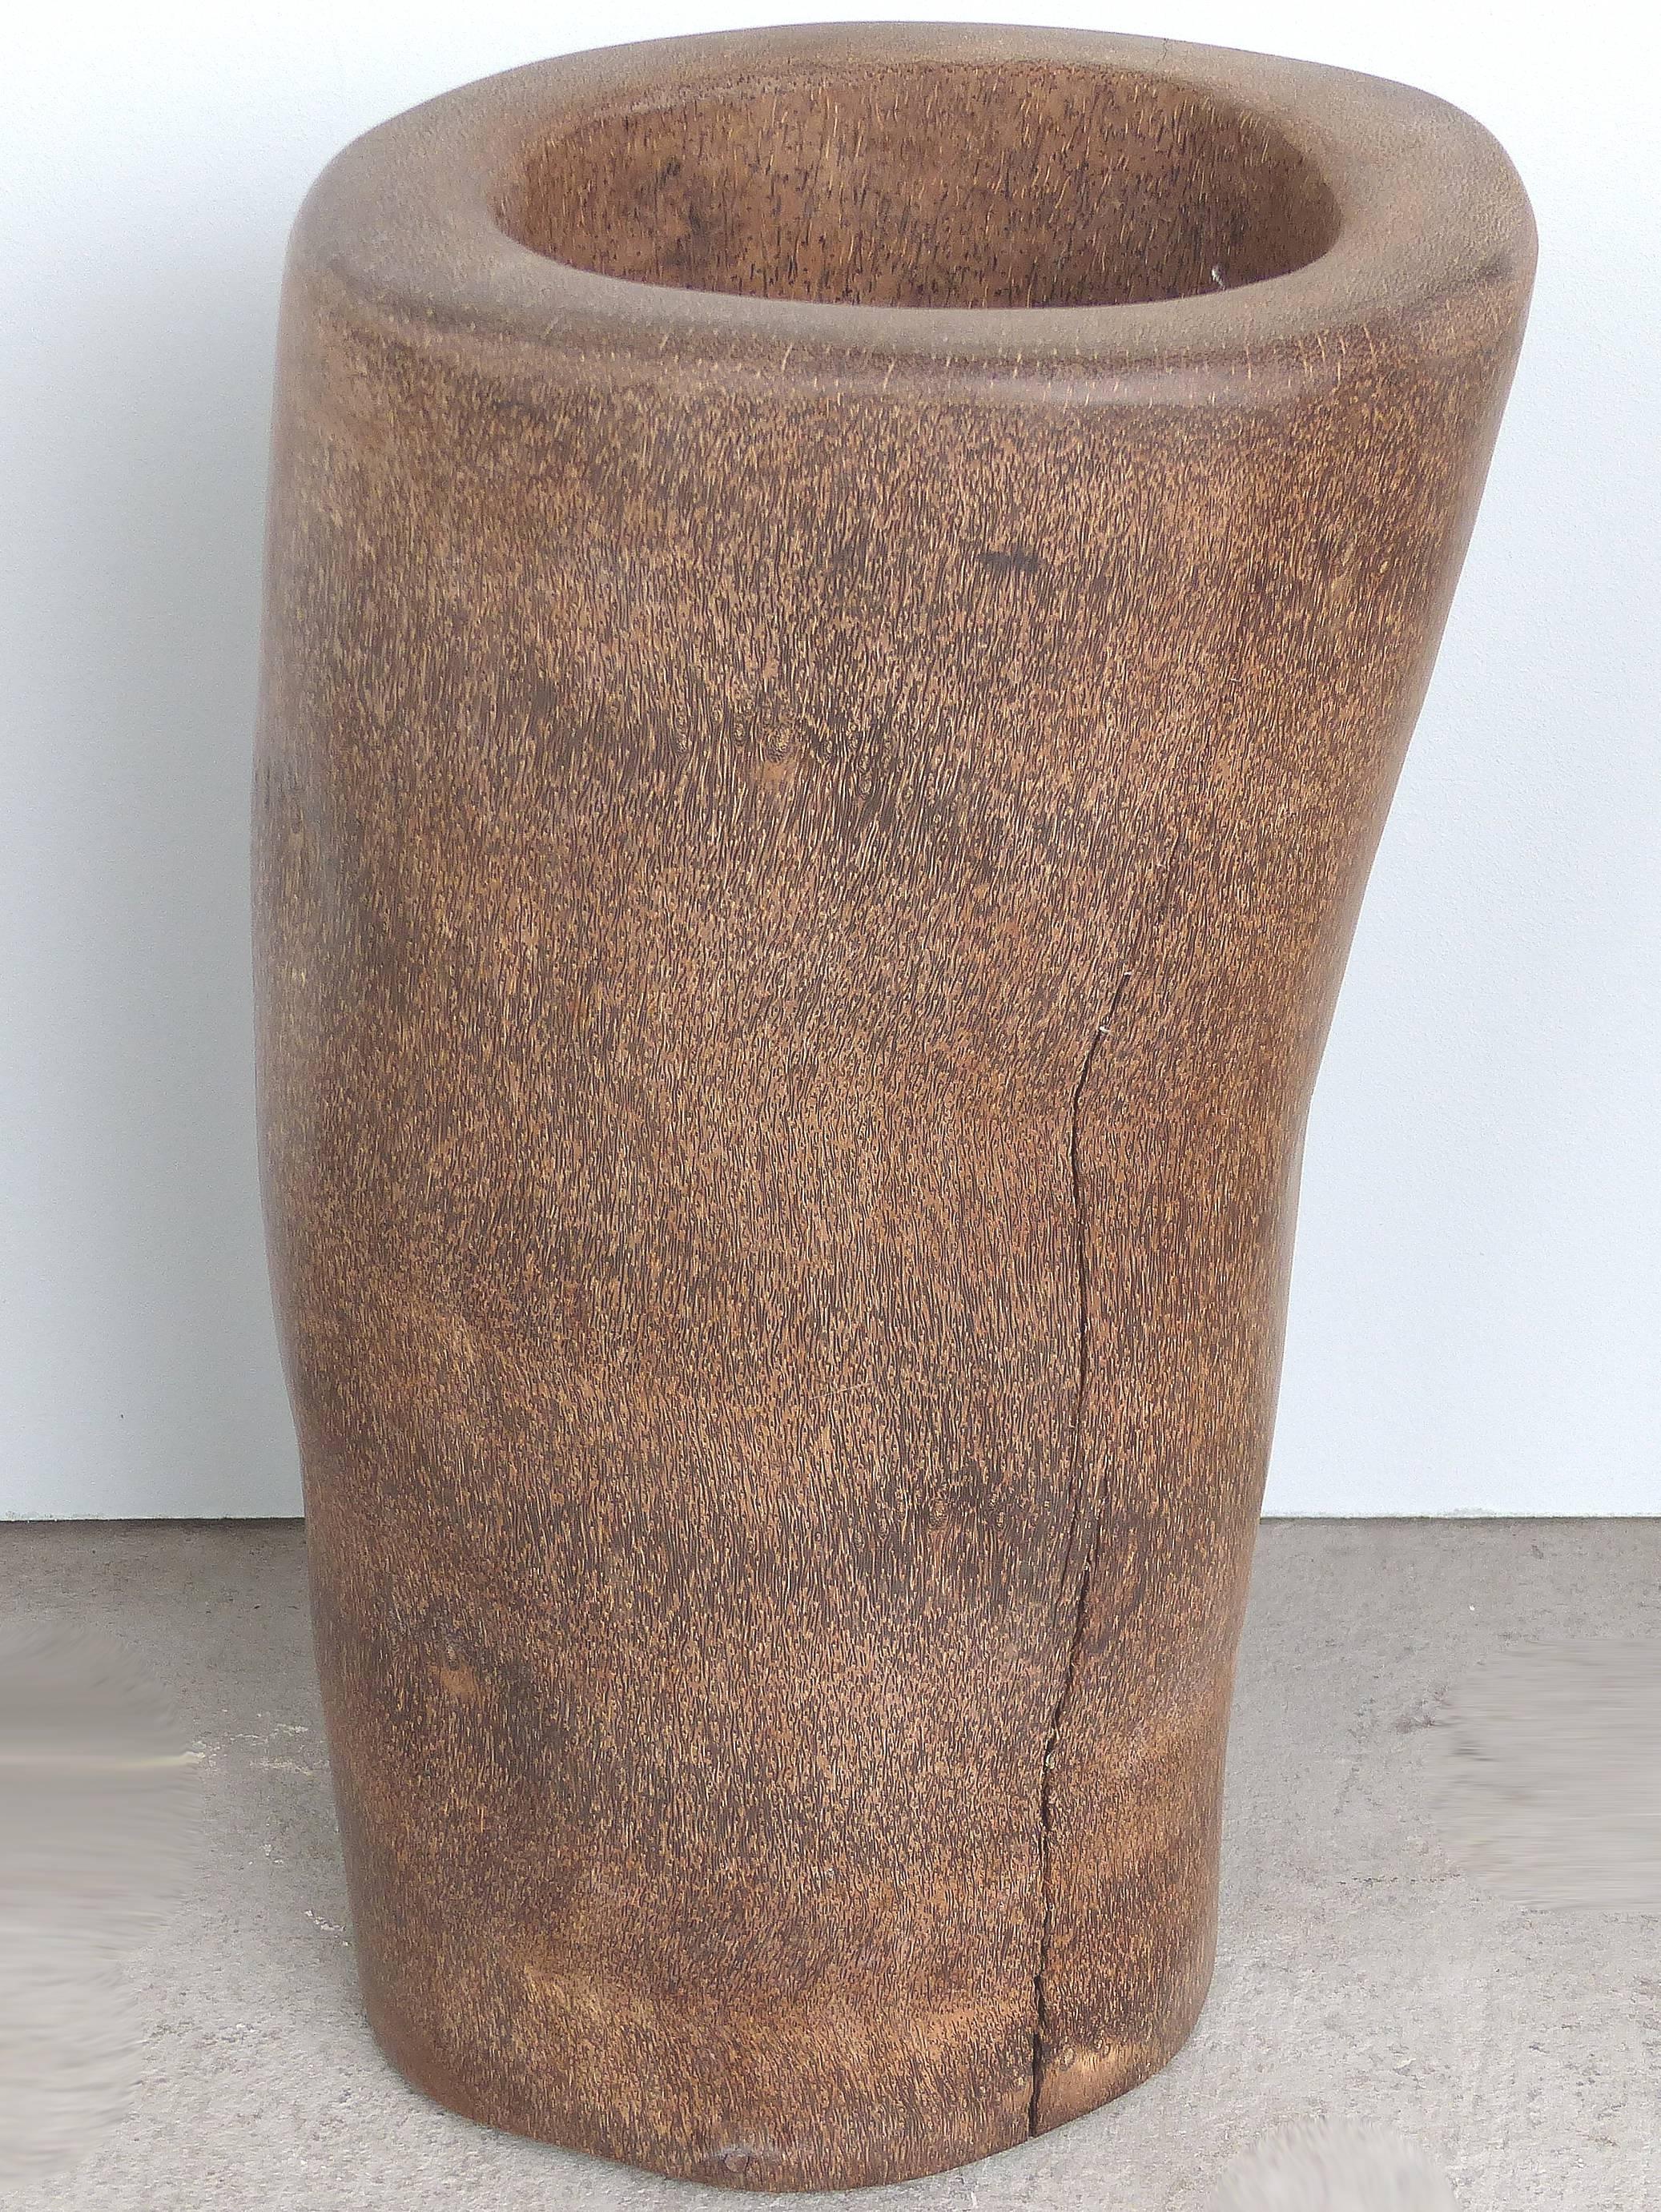 Organic Modern Palm Wood Umbrella Stand, Vessel or Vase

Offered for sale is a rustic and weathered carved tree trunk that appears to be palm wood. It can be used as a vase, umbrella stand or vessel.